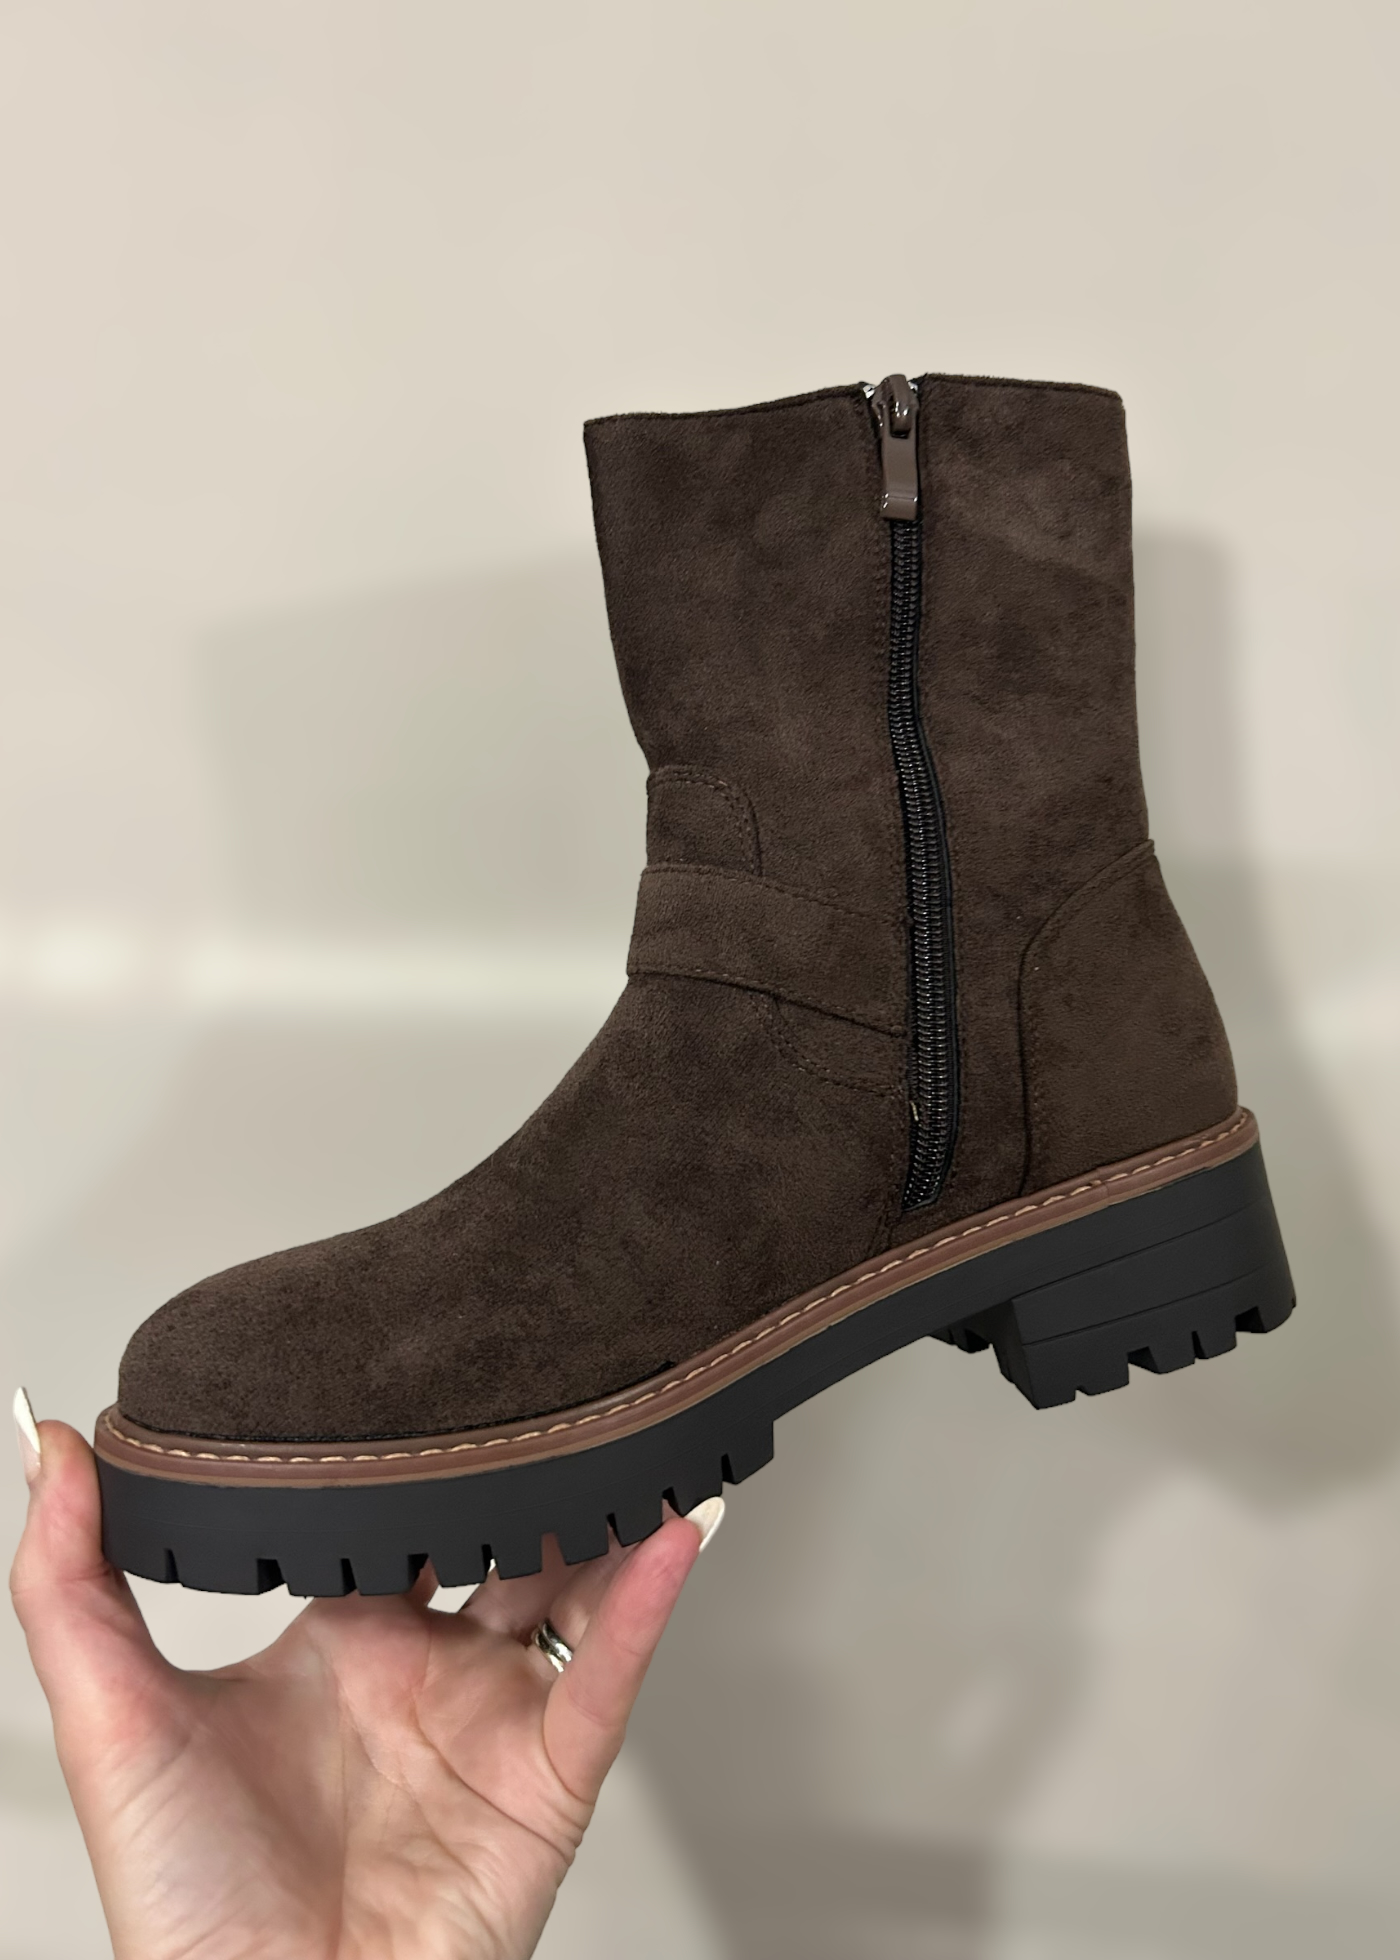 Gladrags | Hot chocolate boot